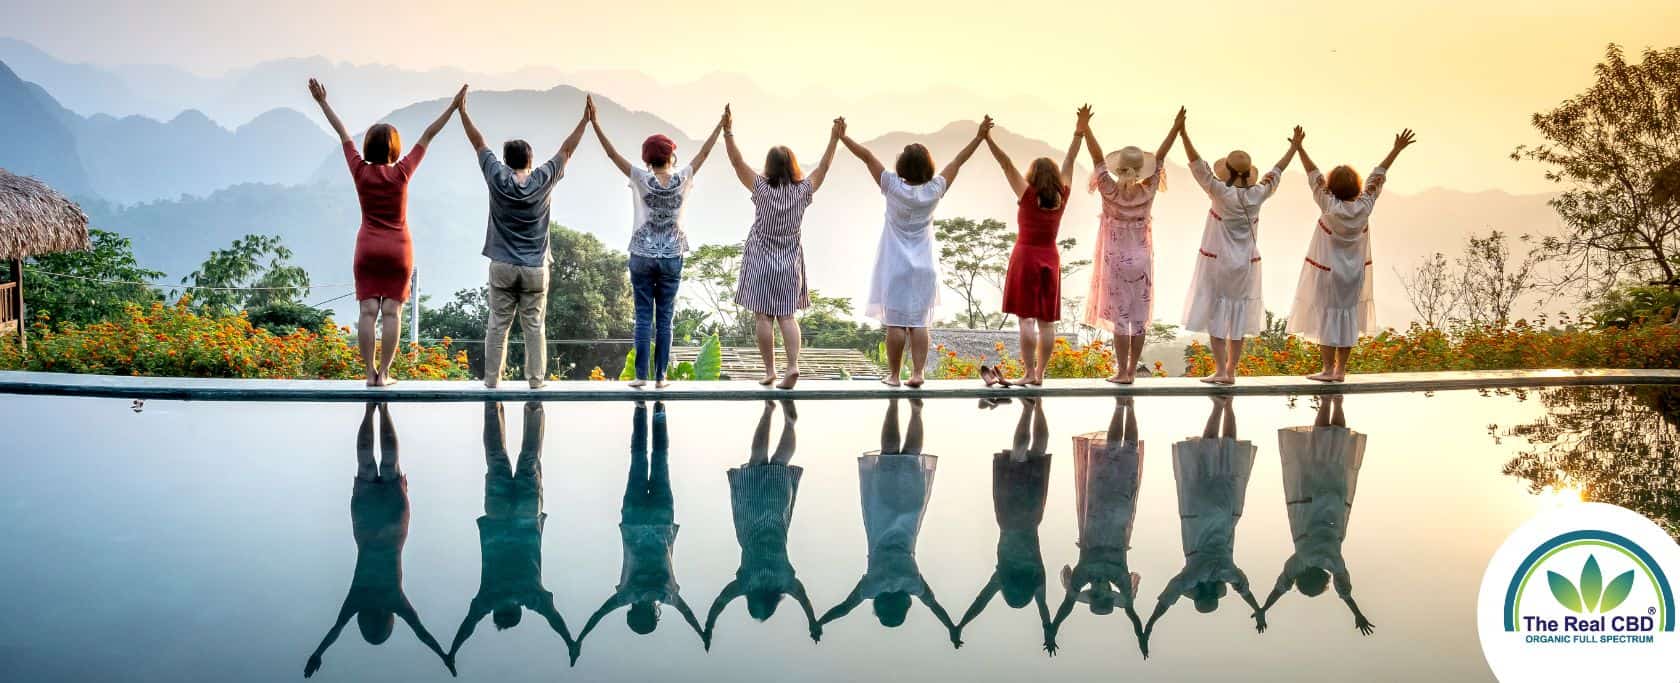 A row of happy people standing celebrating life on the edge of a pool